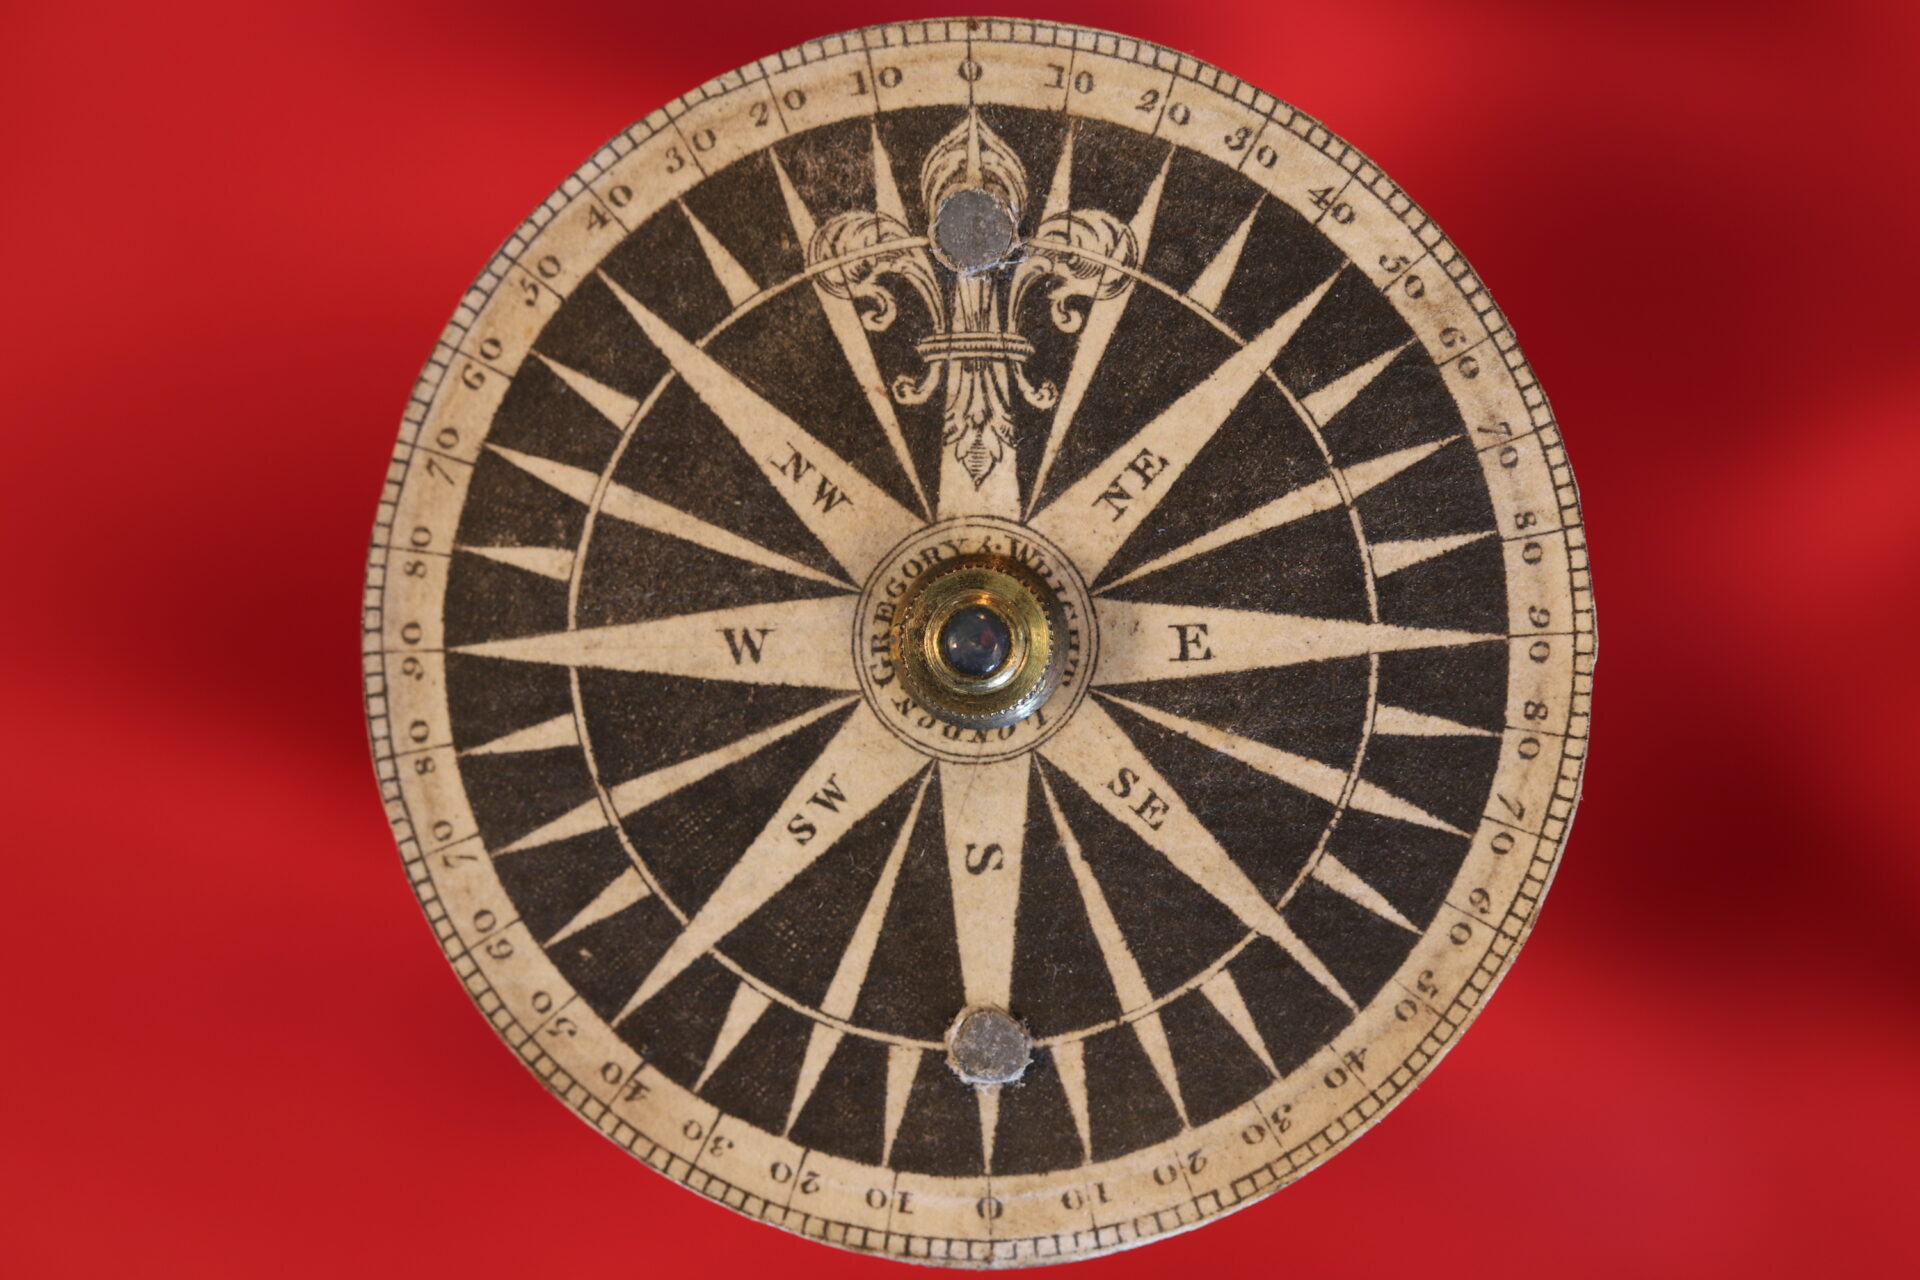 Image of card from Gregory & Wright Gimballed Mariners Compass c1785